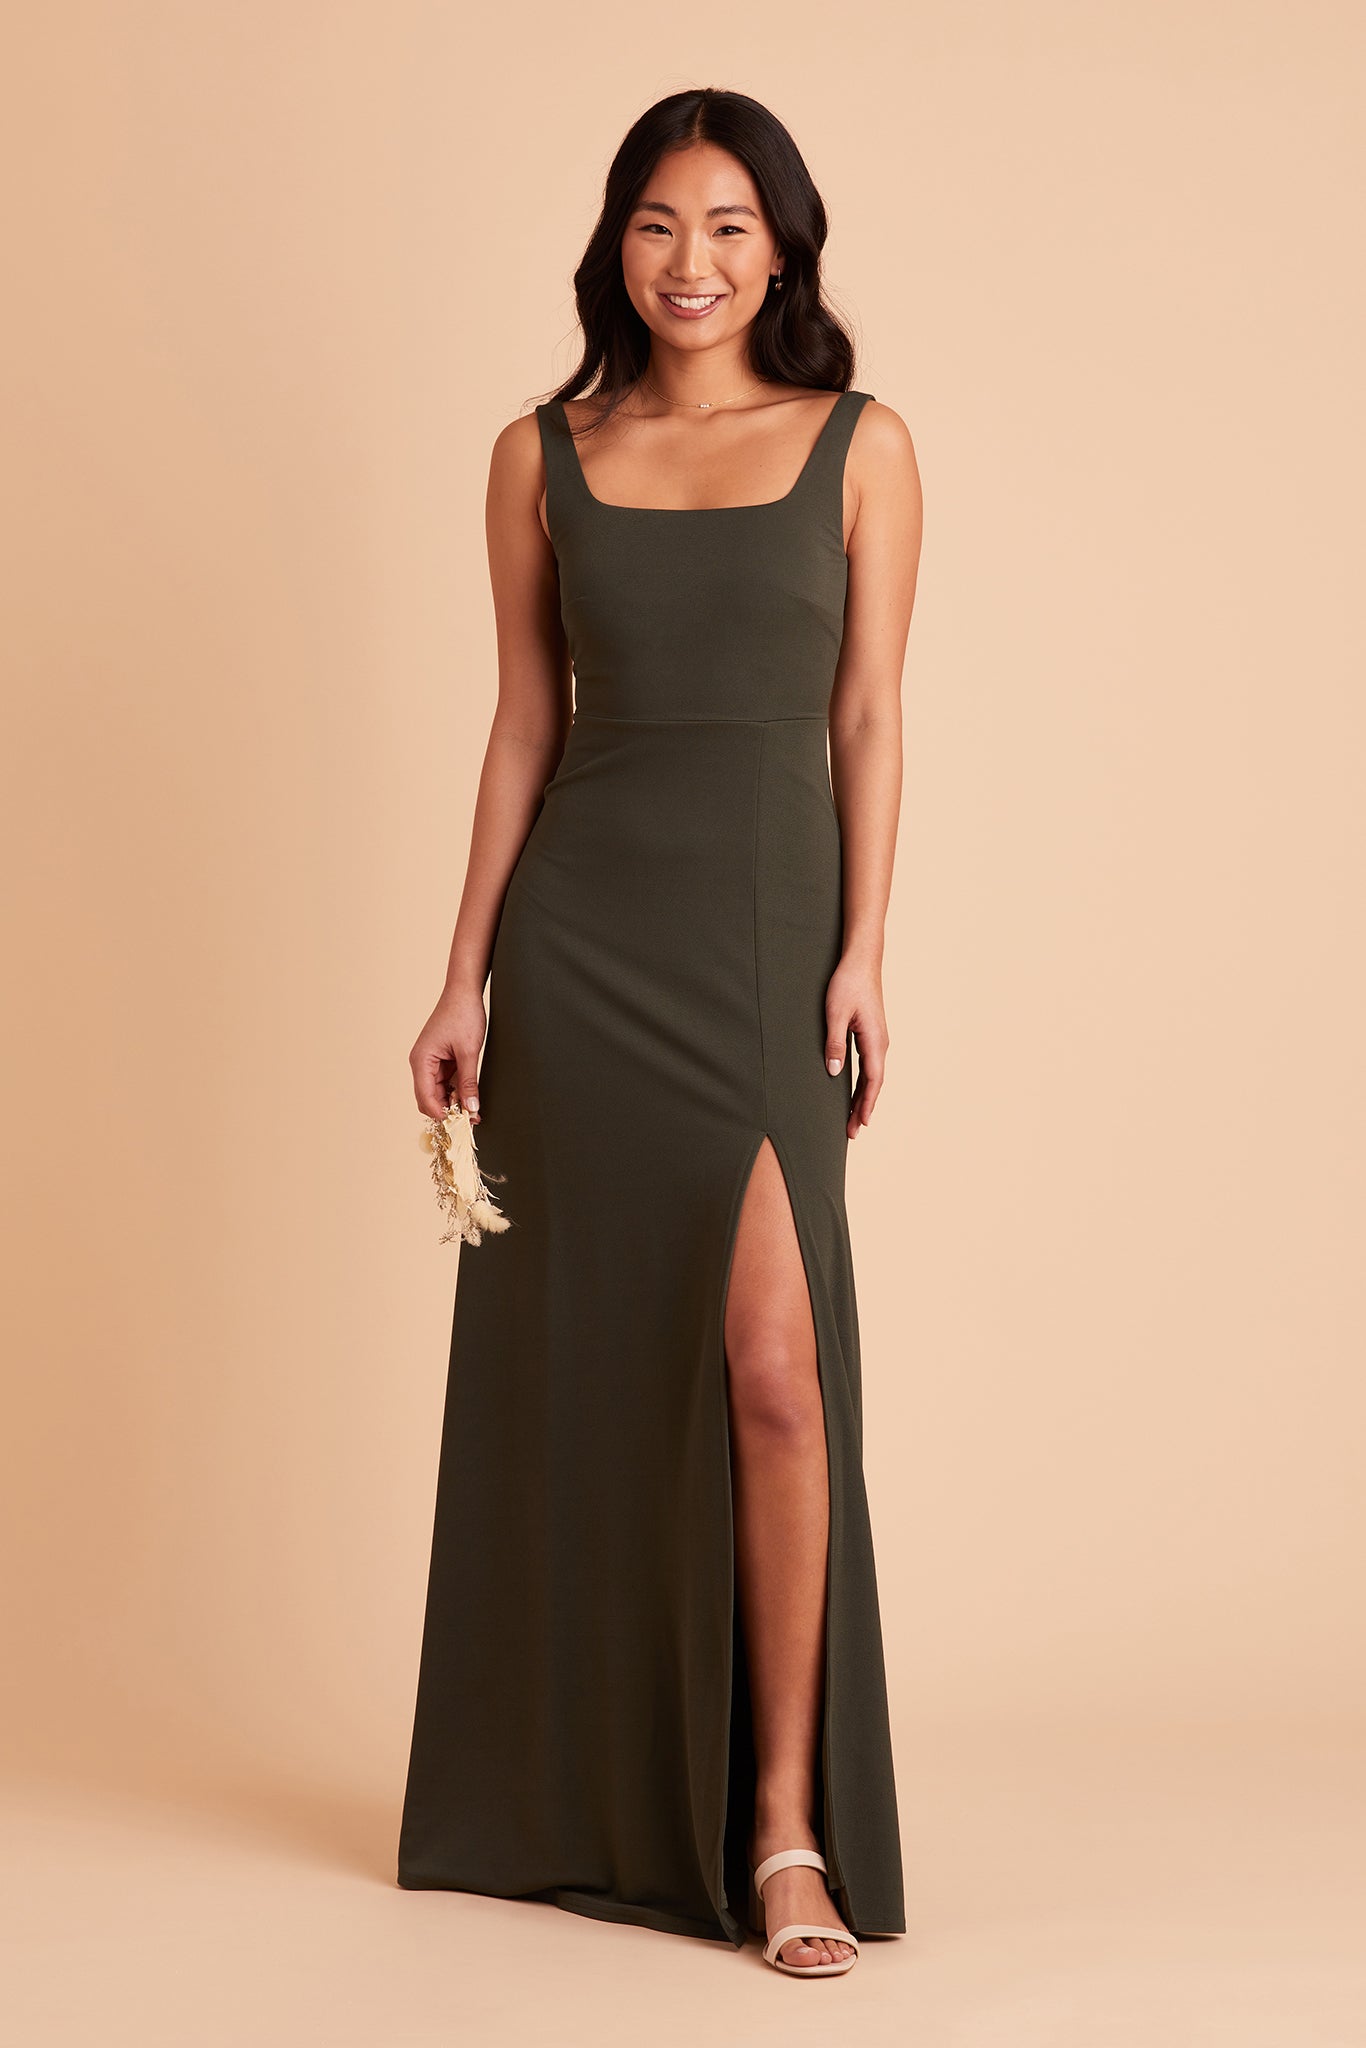 Alex convertible bridesmaid dress with slit in olive crepe by Birdy Grey, front view